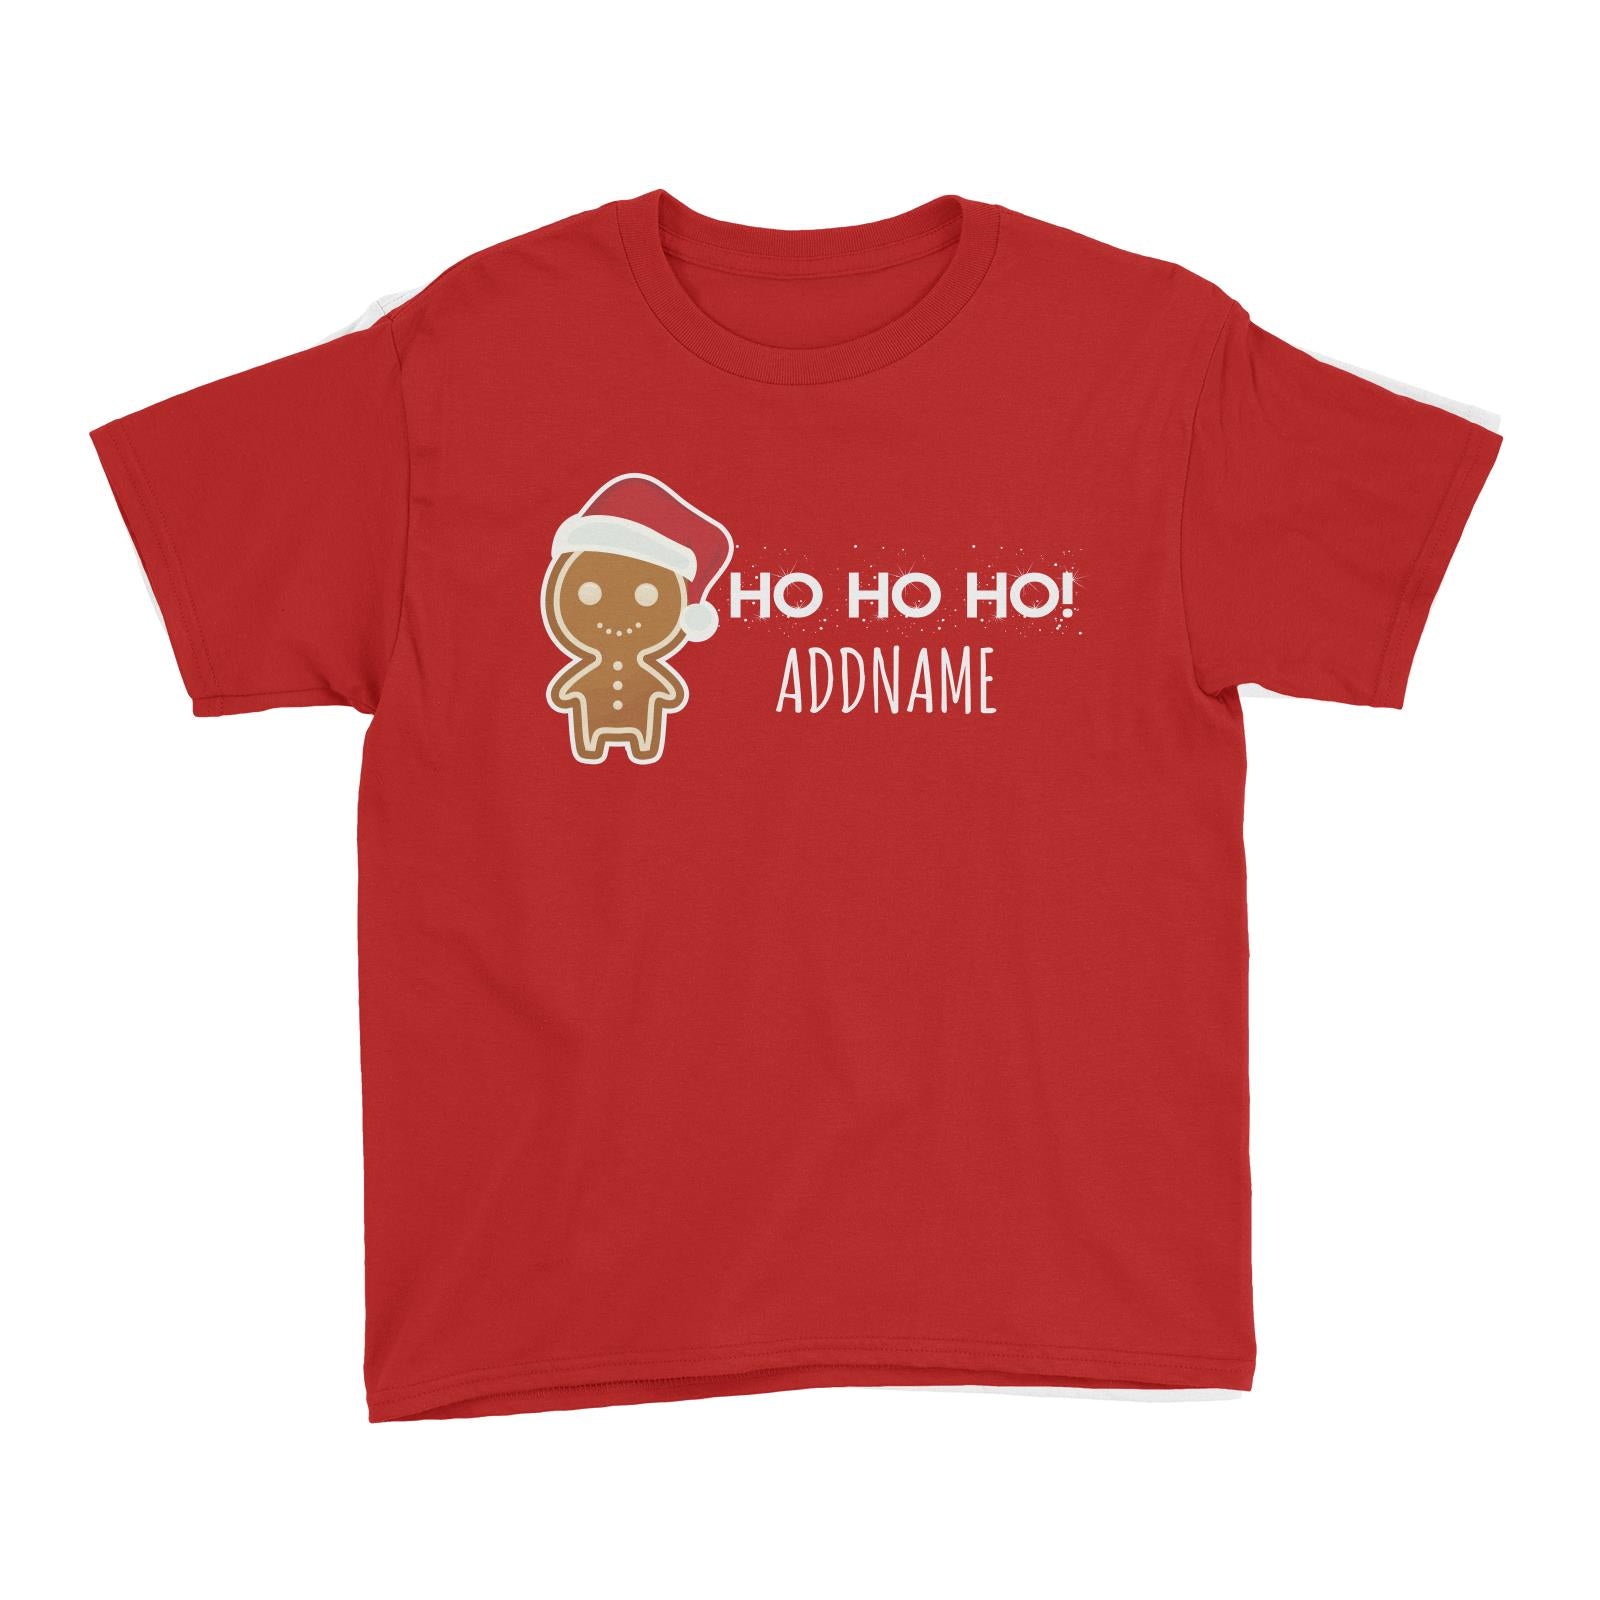 Cute Gingerbread Man with Santa Hat Addname Kid's T-Shirt Christmas Matching Family Lettering Personalizable Designs